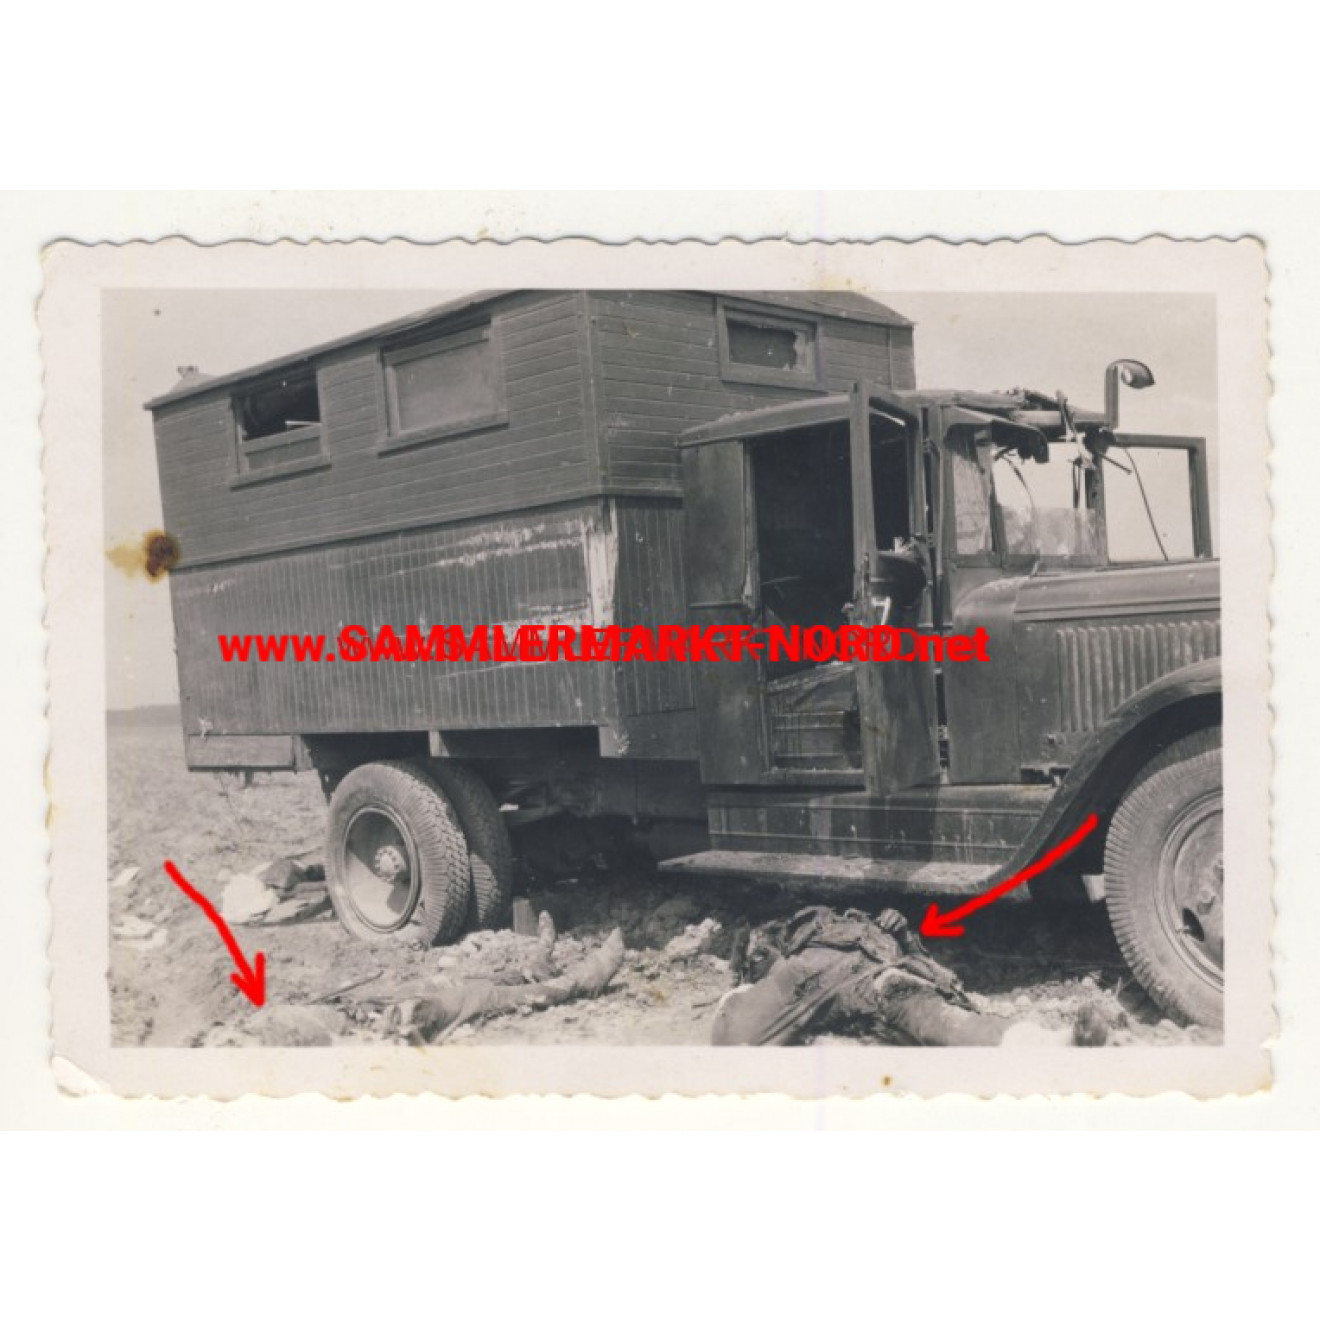 Dead Russian soldiers in front of a truck